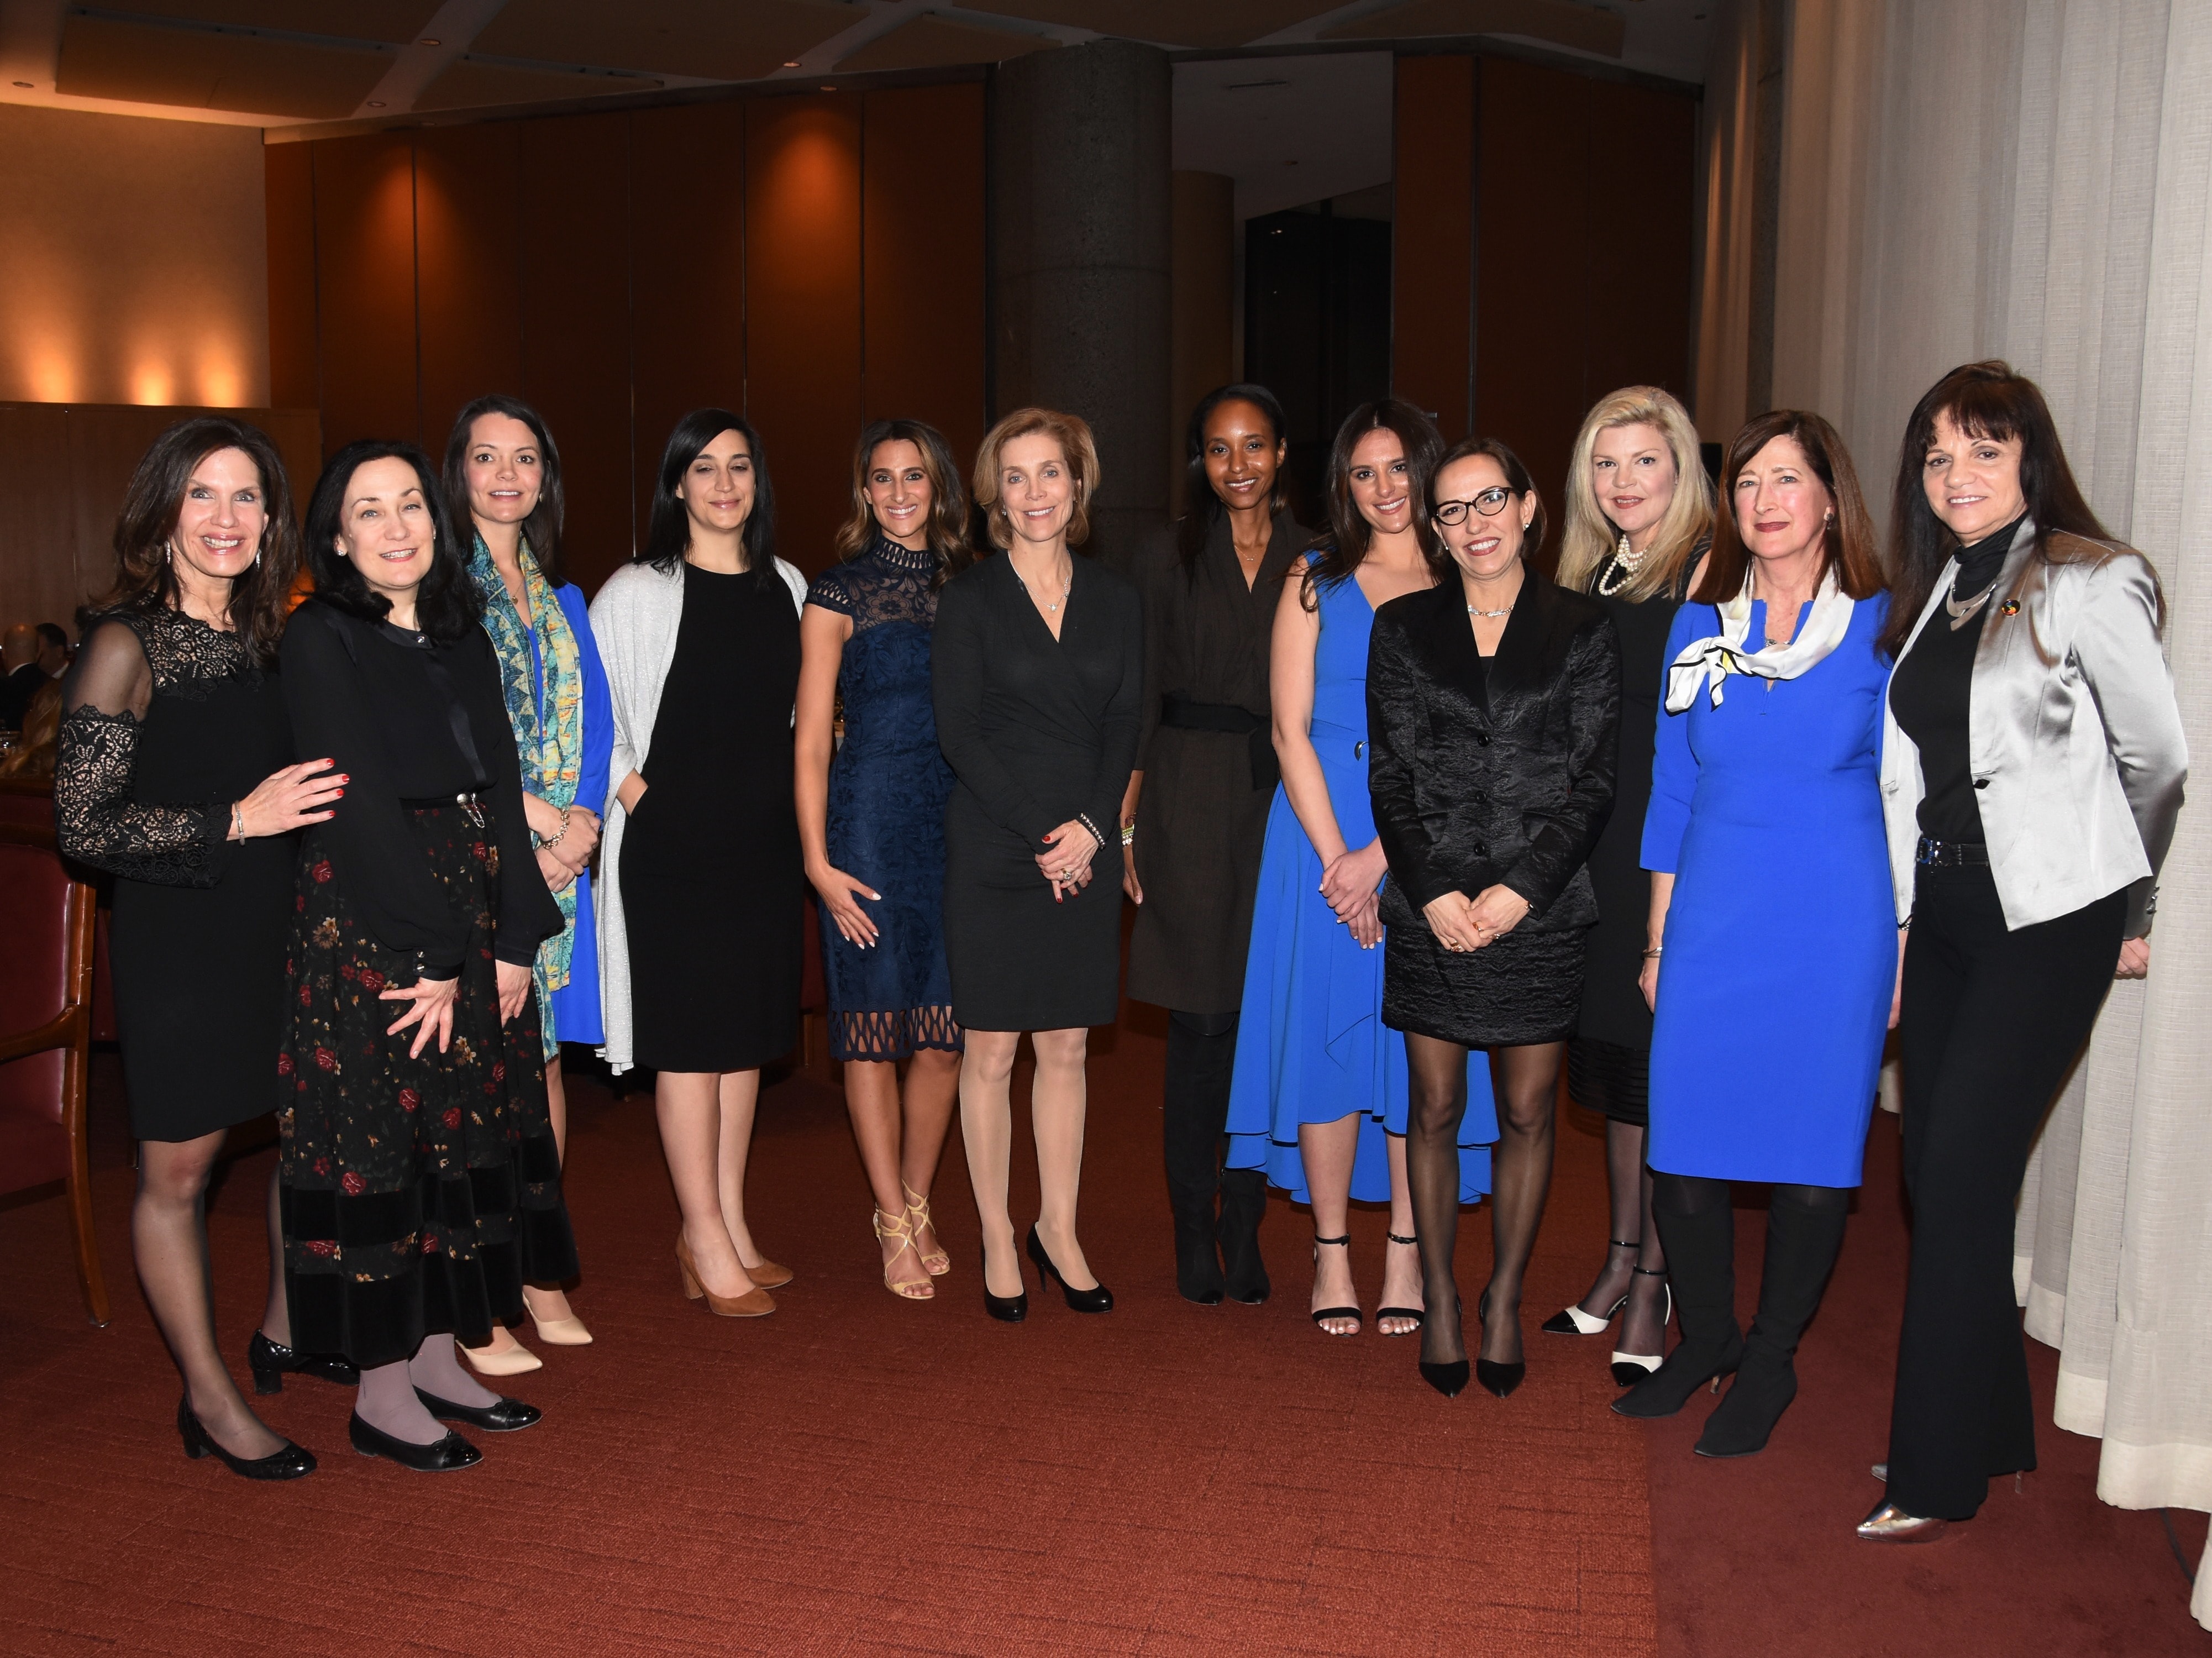 Stacey Cohen (far left) featured with “Top Women in Real Estate” and Lori Sokol, President, Sokol Media (far right)